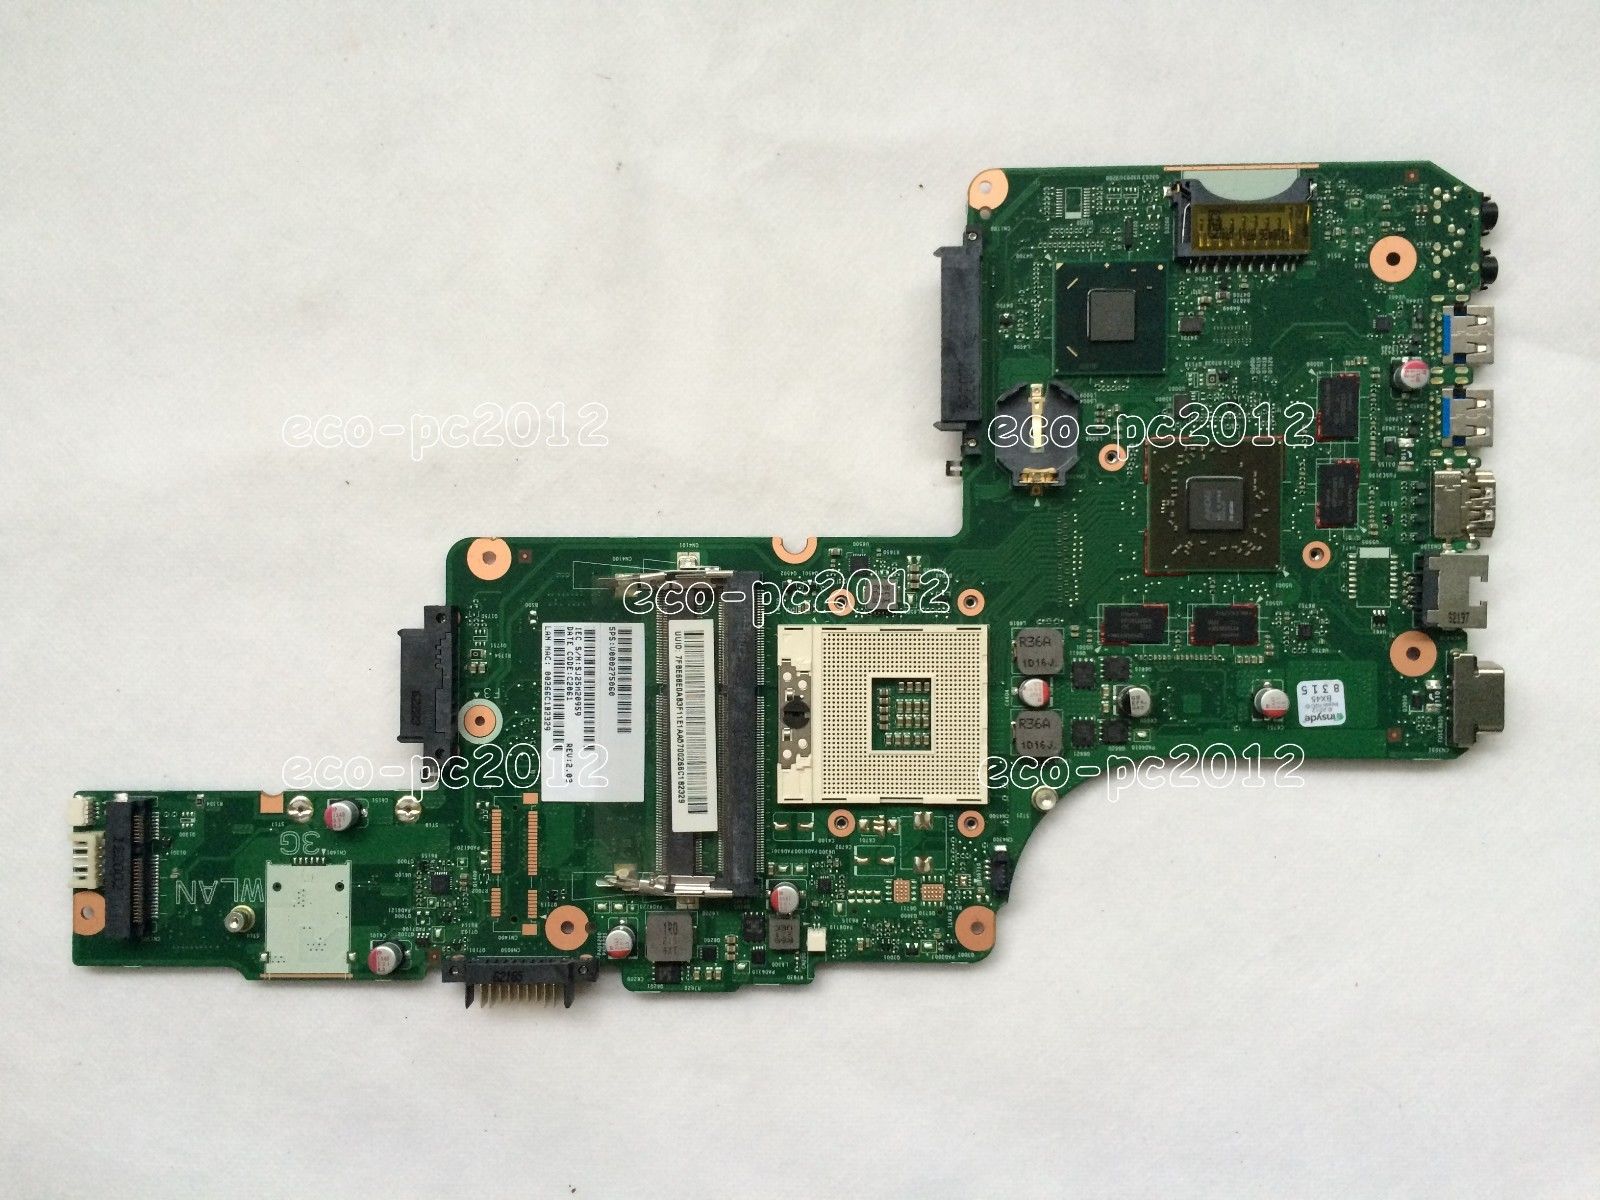 New Toshiba Satellite Intel HM76 Motherboard V000275060 DK10FG-6050A2491301-MB-A02 - Click Image to Close